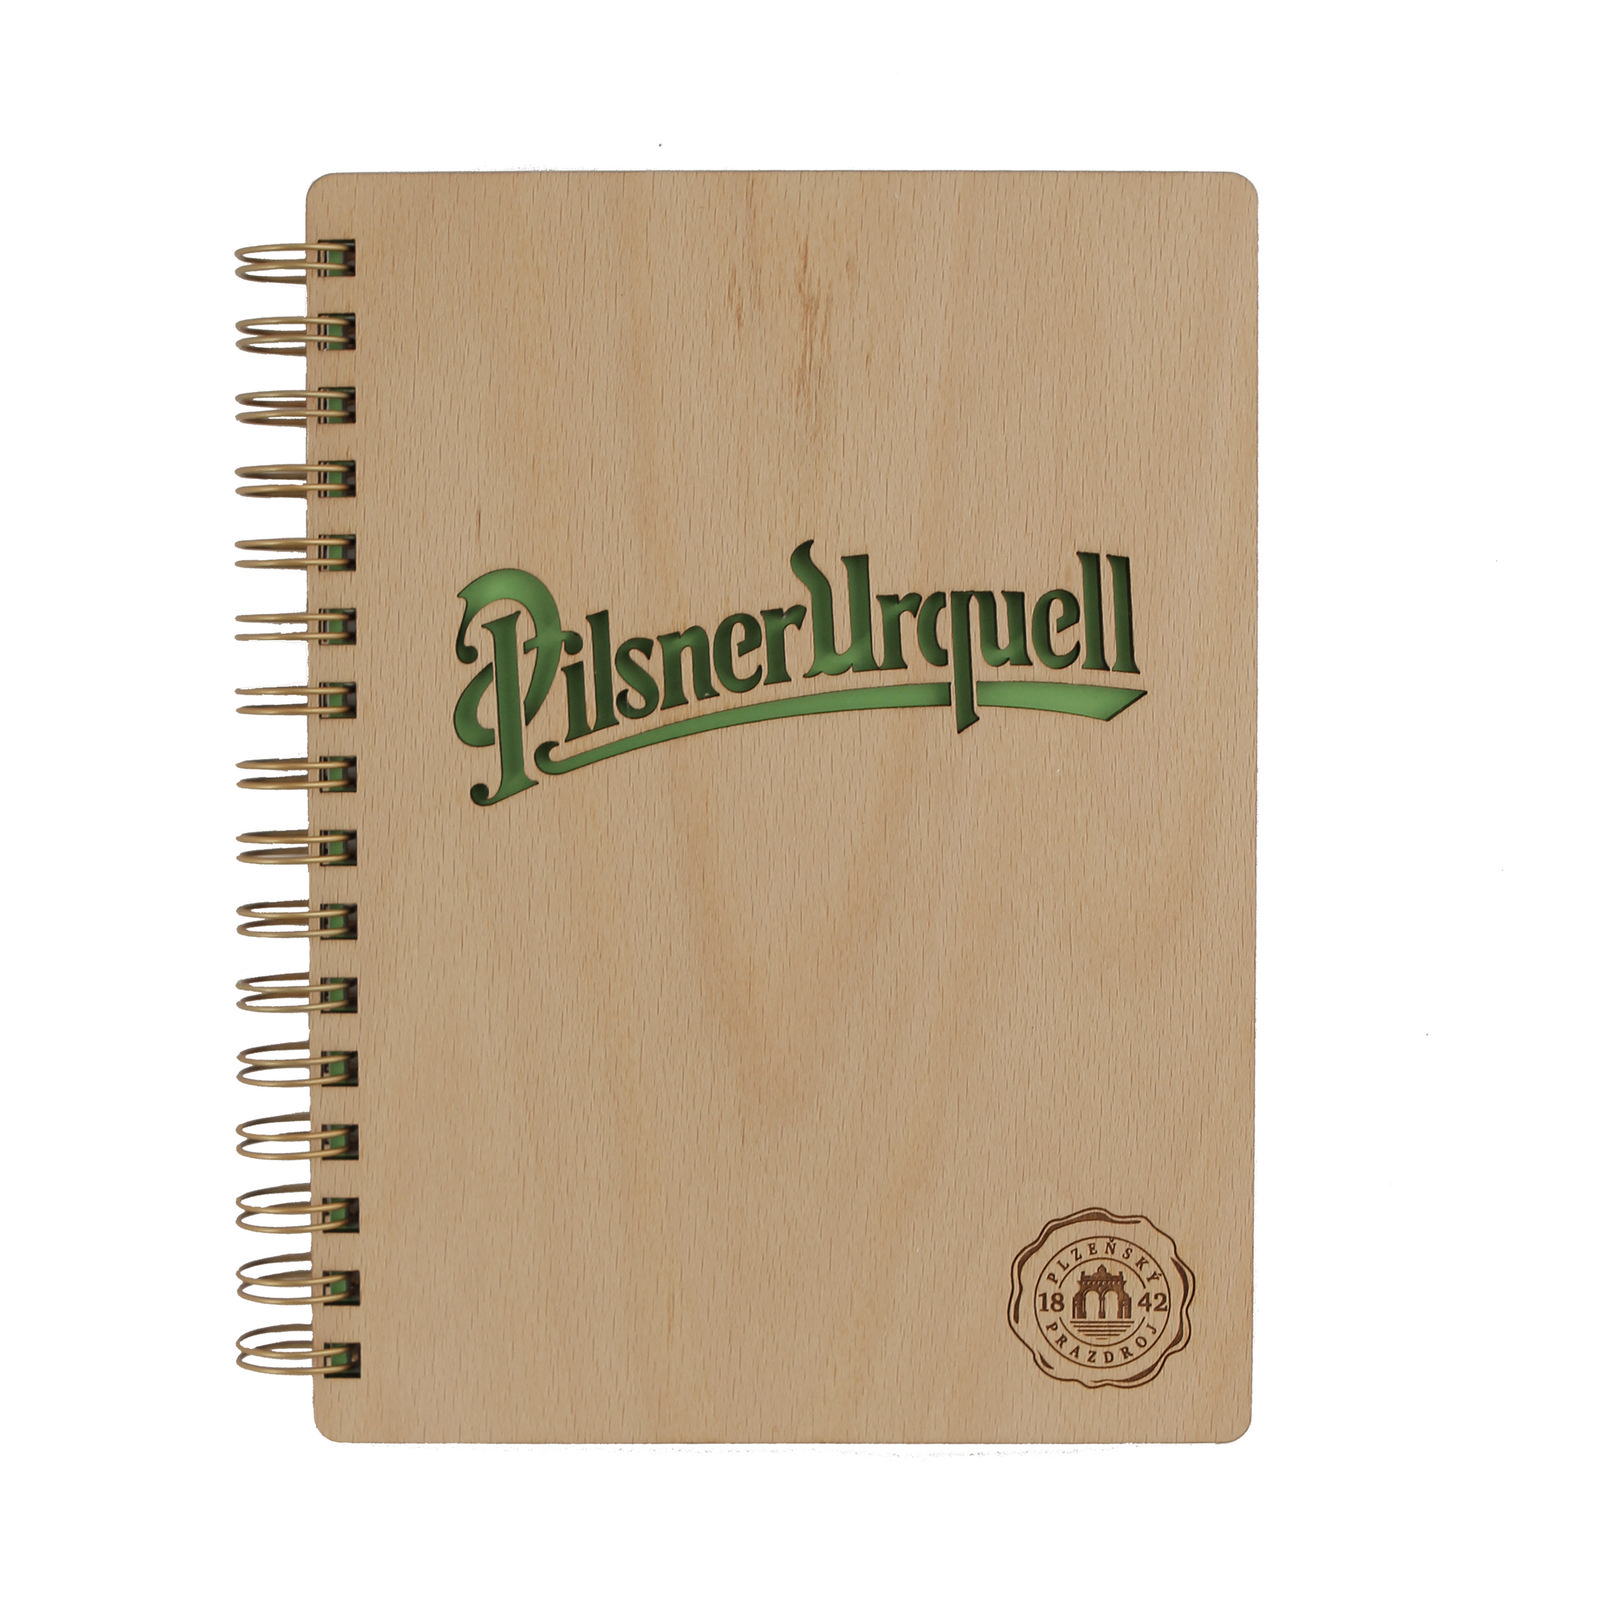 Green Pilsner Urquell Notepad with Wooden Boards